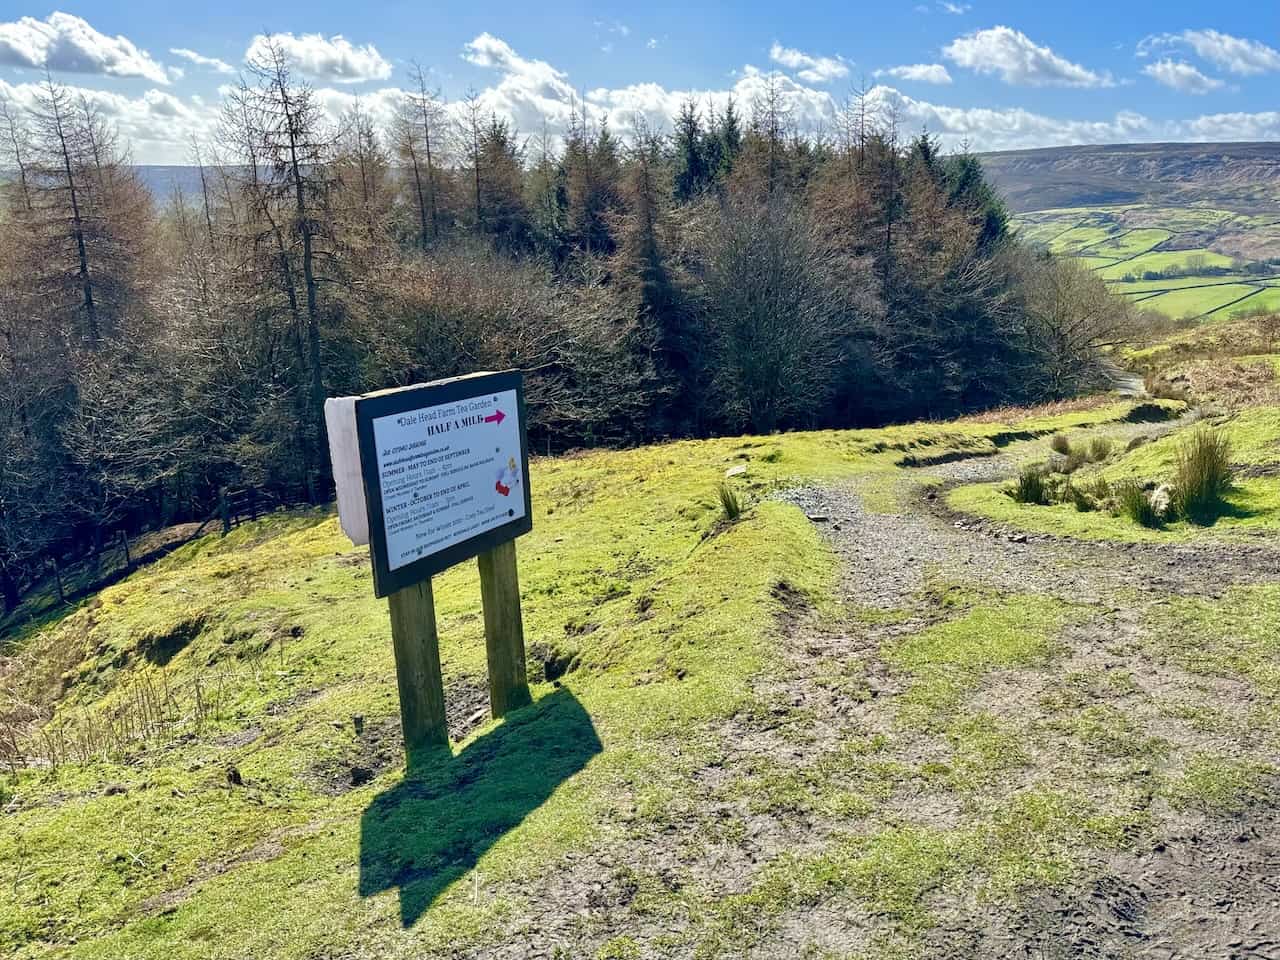 A footpath leading from the Rosedale Railway walk trackbed on the eastern side of the valley near Nab Scar offers access to various parts of the Rosedale valley, including Dale Head Farm. Here, visitors can enjoy the café and avail themselves of teas, coffees, cakes, and other refreshments.